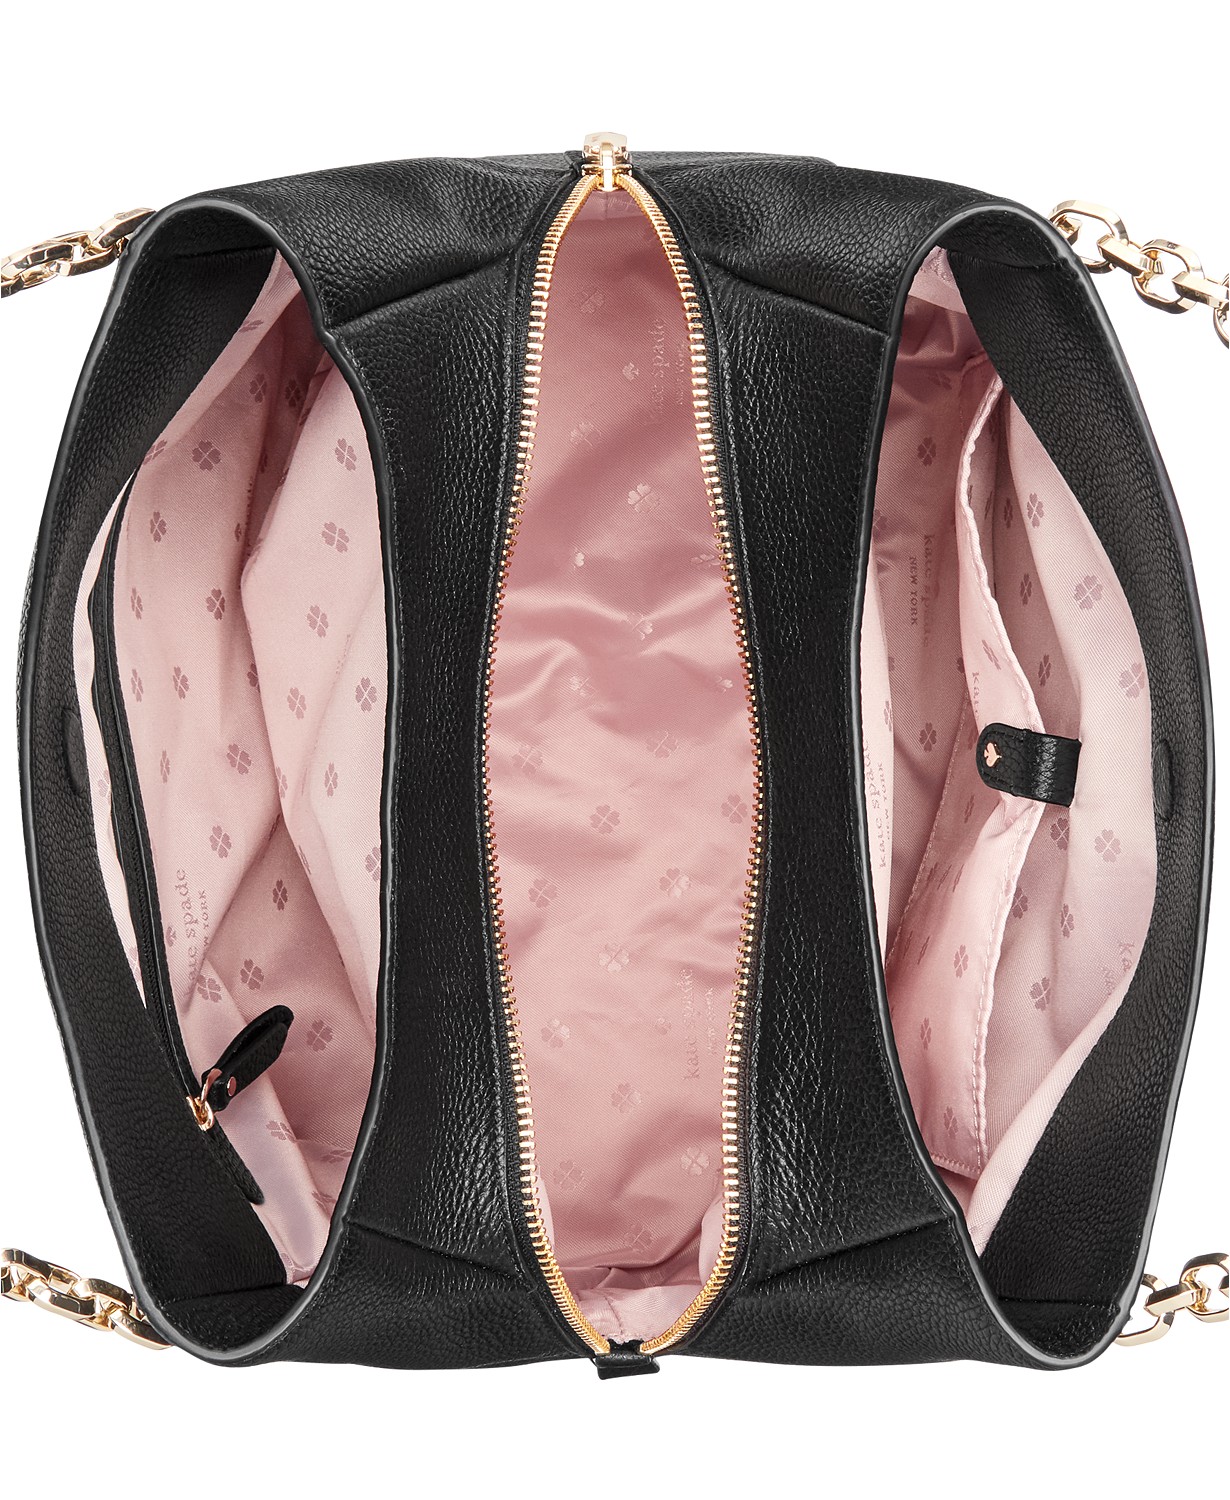 Score This Classic Kate Spade Leather Shoulder Bag for Over 40% Off ...